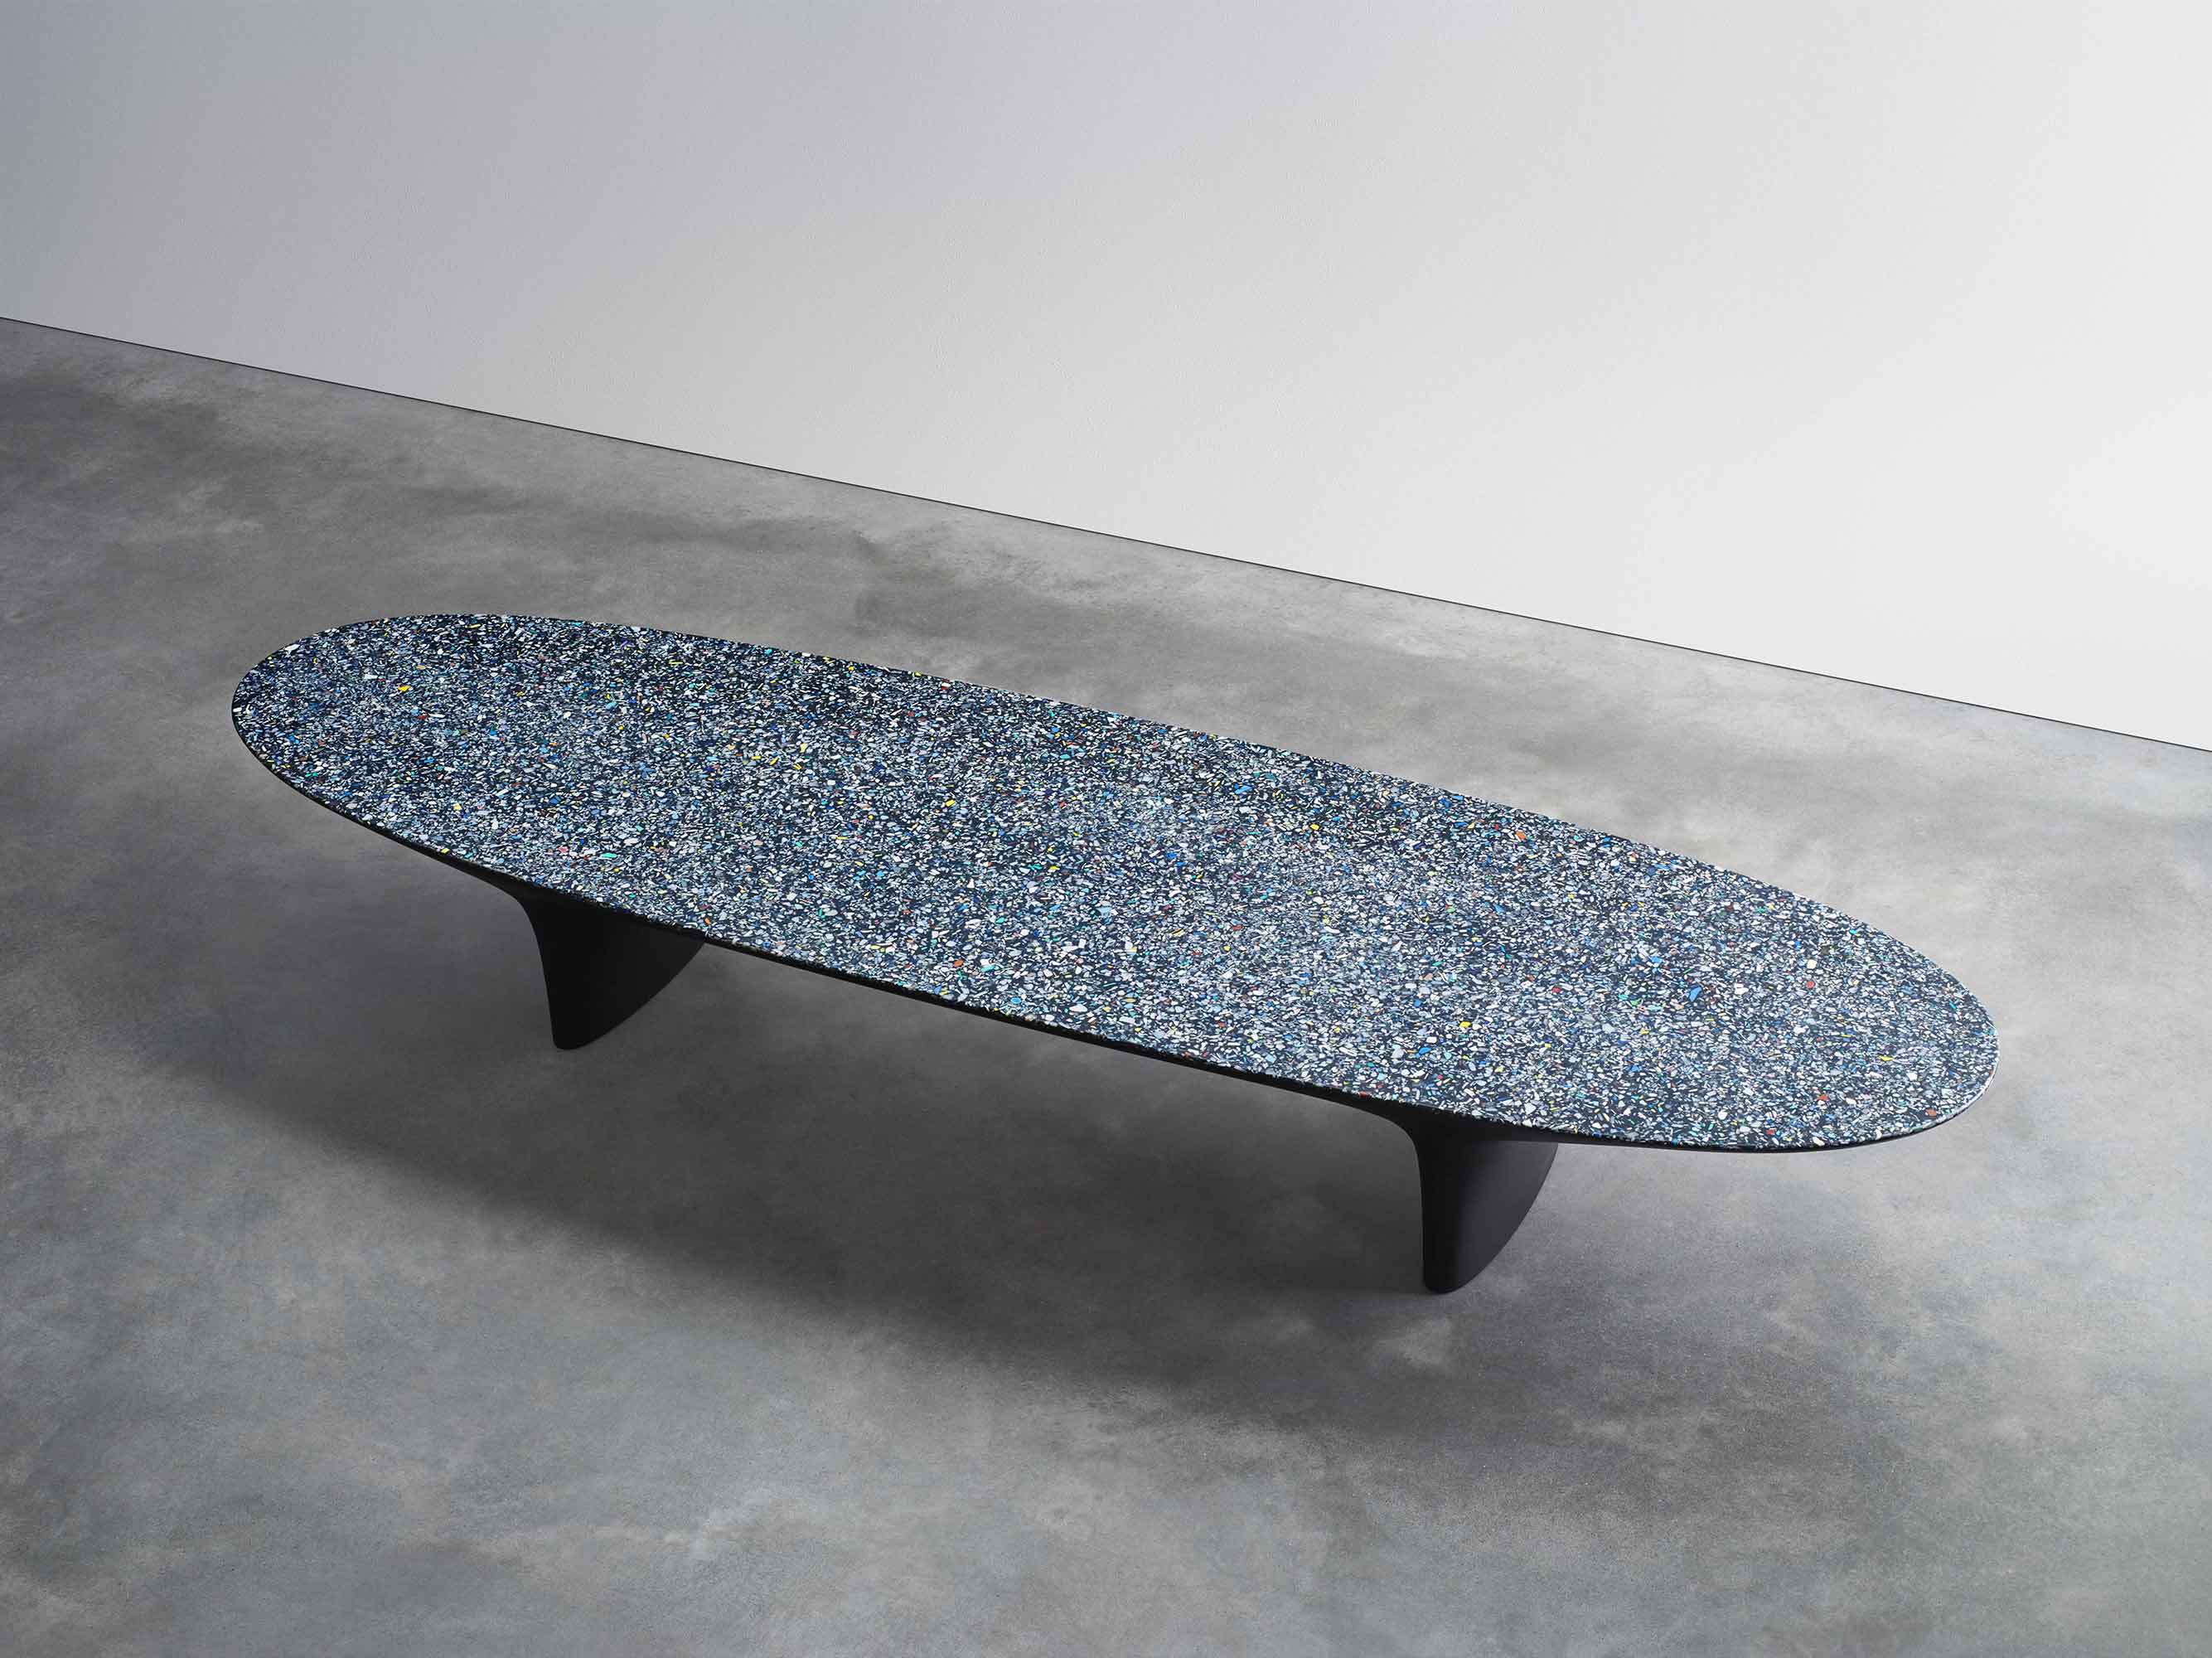 brodie-neill-transmutes-metals-ocean-plastic-and-reclaimed-timber-into-functional-objects